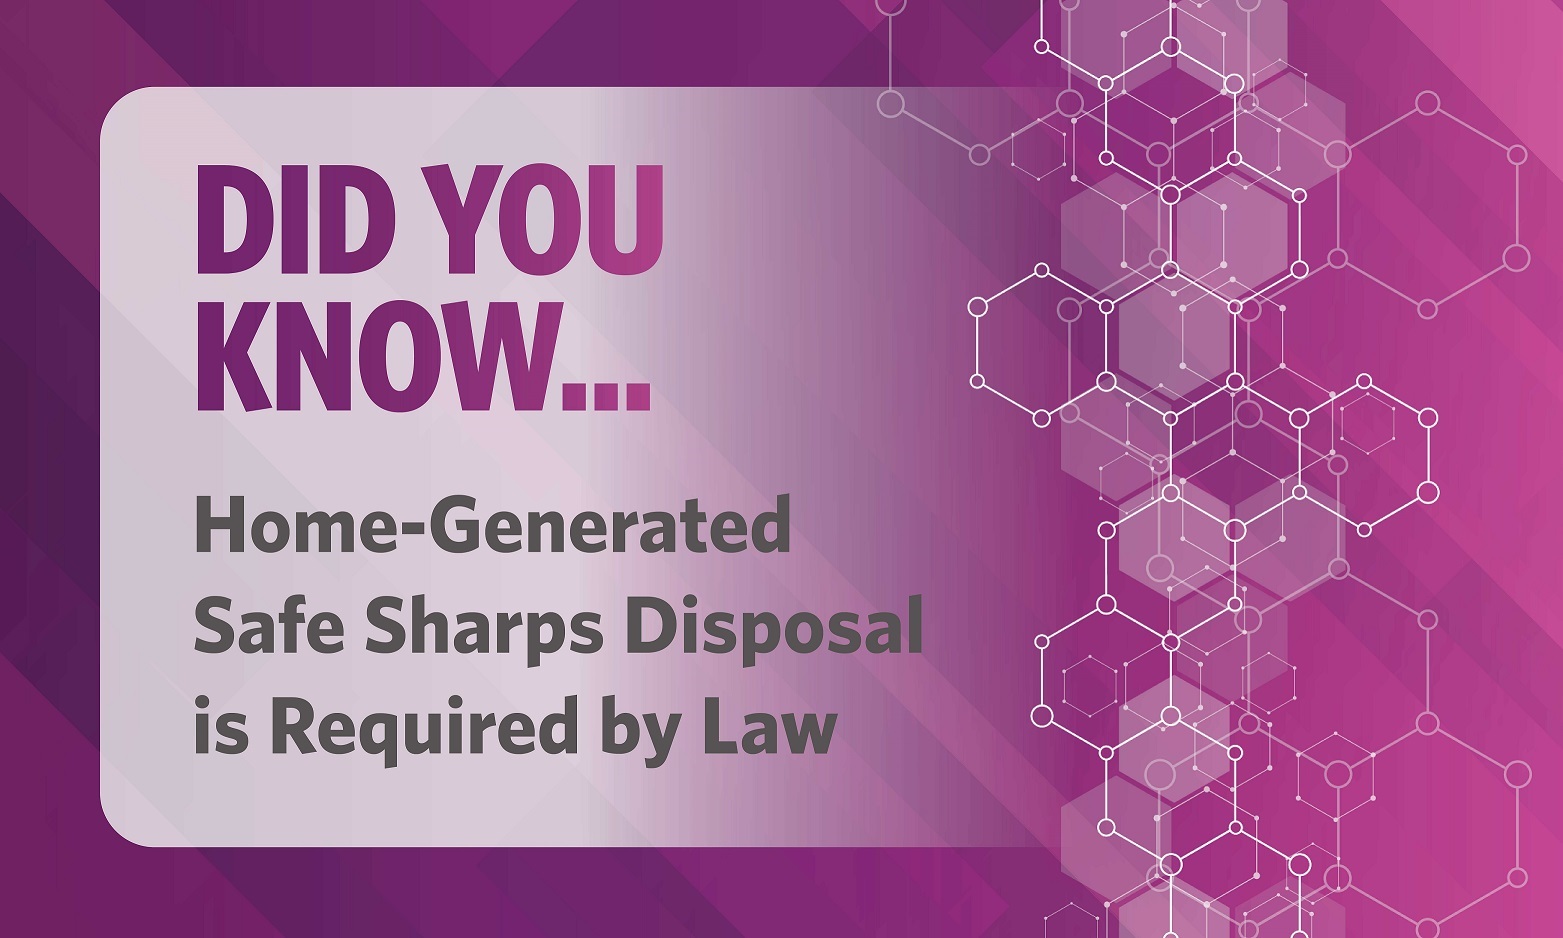 Home-Generated Safe Sharps Disposal is Required by Law